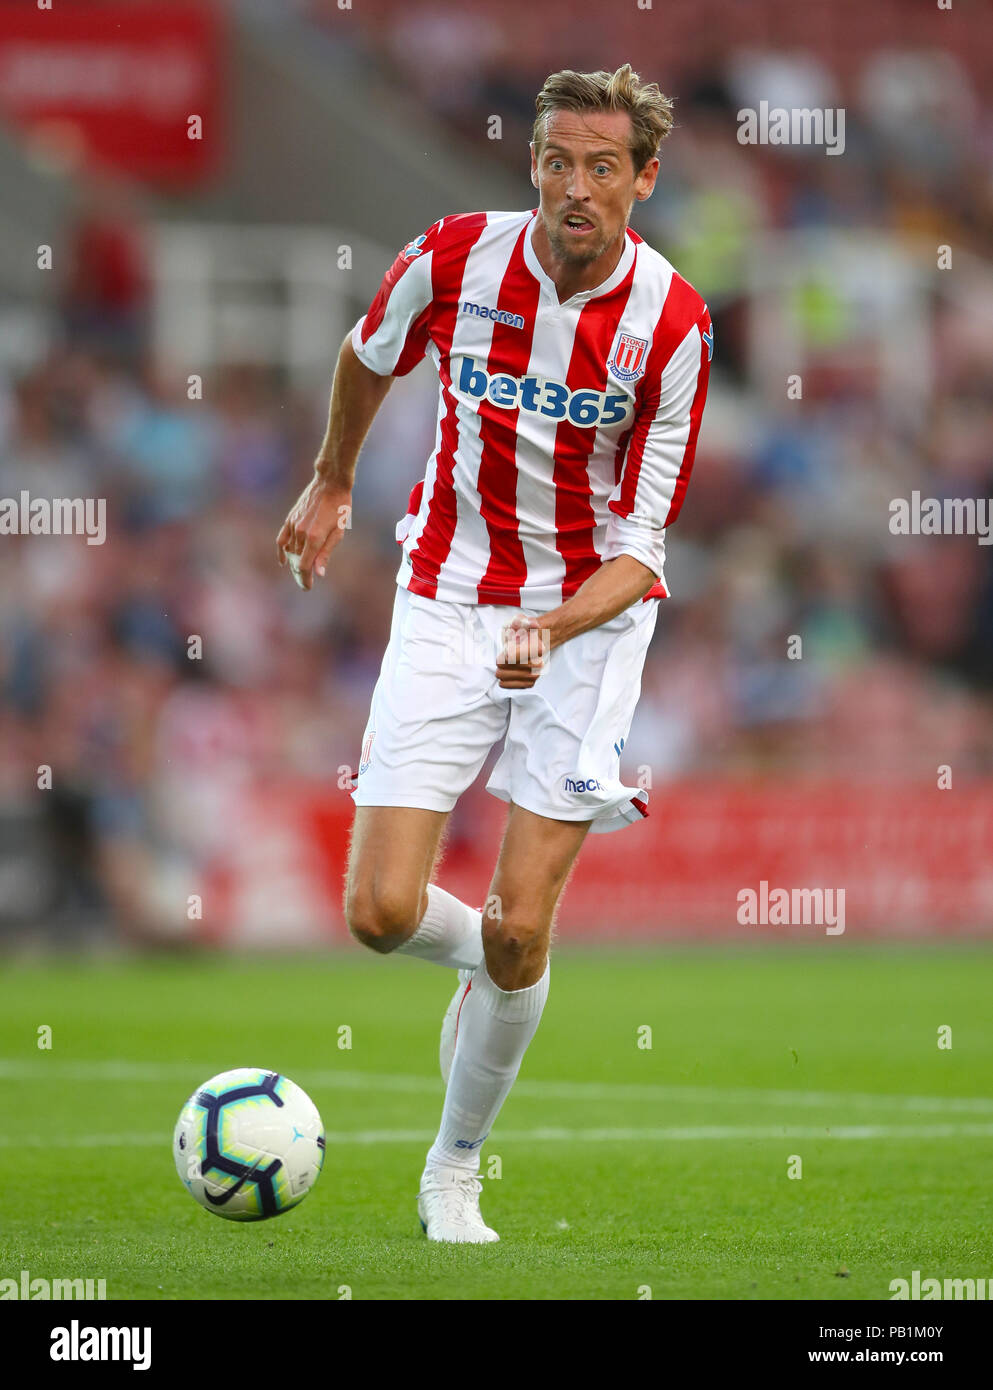 Stoke City's Peter Crouch during a pre season friendly match at The Bet365 Stadium, Stoke. PRESS ASSOCIATION Photo. Picture date: Wednesday July 25, 2018. Photo credit should read: Nick Potts/PA Wire. EDITORIAL USE ONLY No use with unauthorised audio, video, data, fixture lists, club/league logos or 'live' services. Online in-match use limited to 75 images, no video emulation. No use in betting, games or single club/league/player publications. Stock Photo